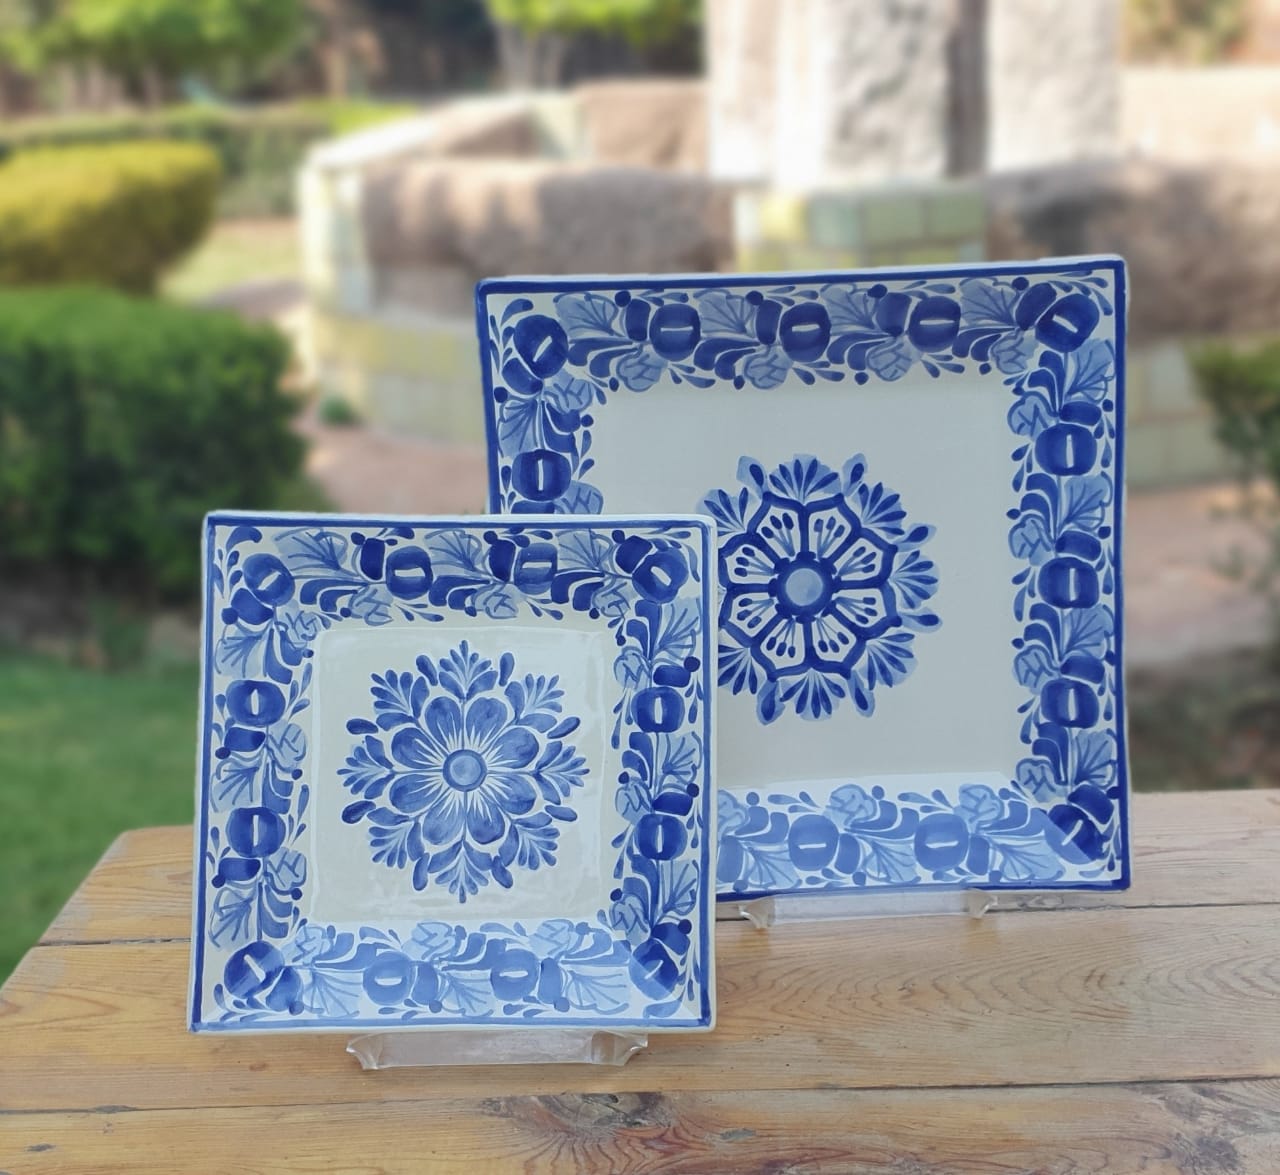 Flower Square Plates Set of 2 Blue and White